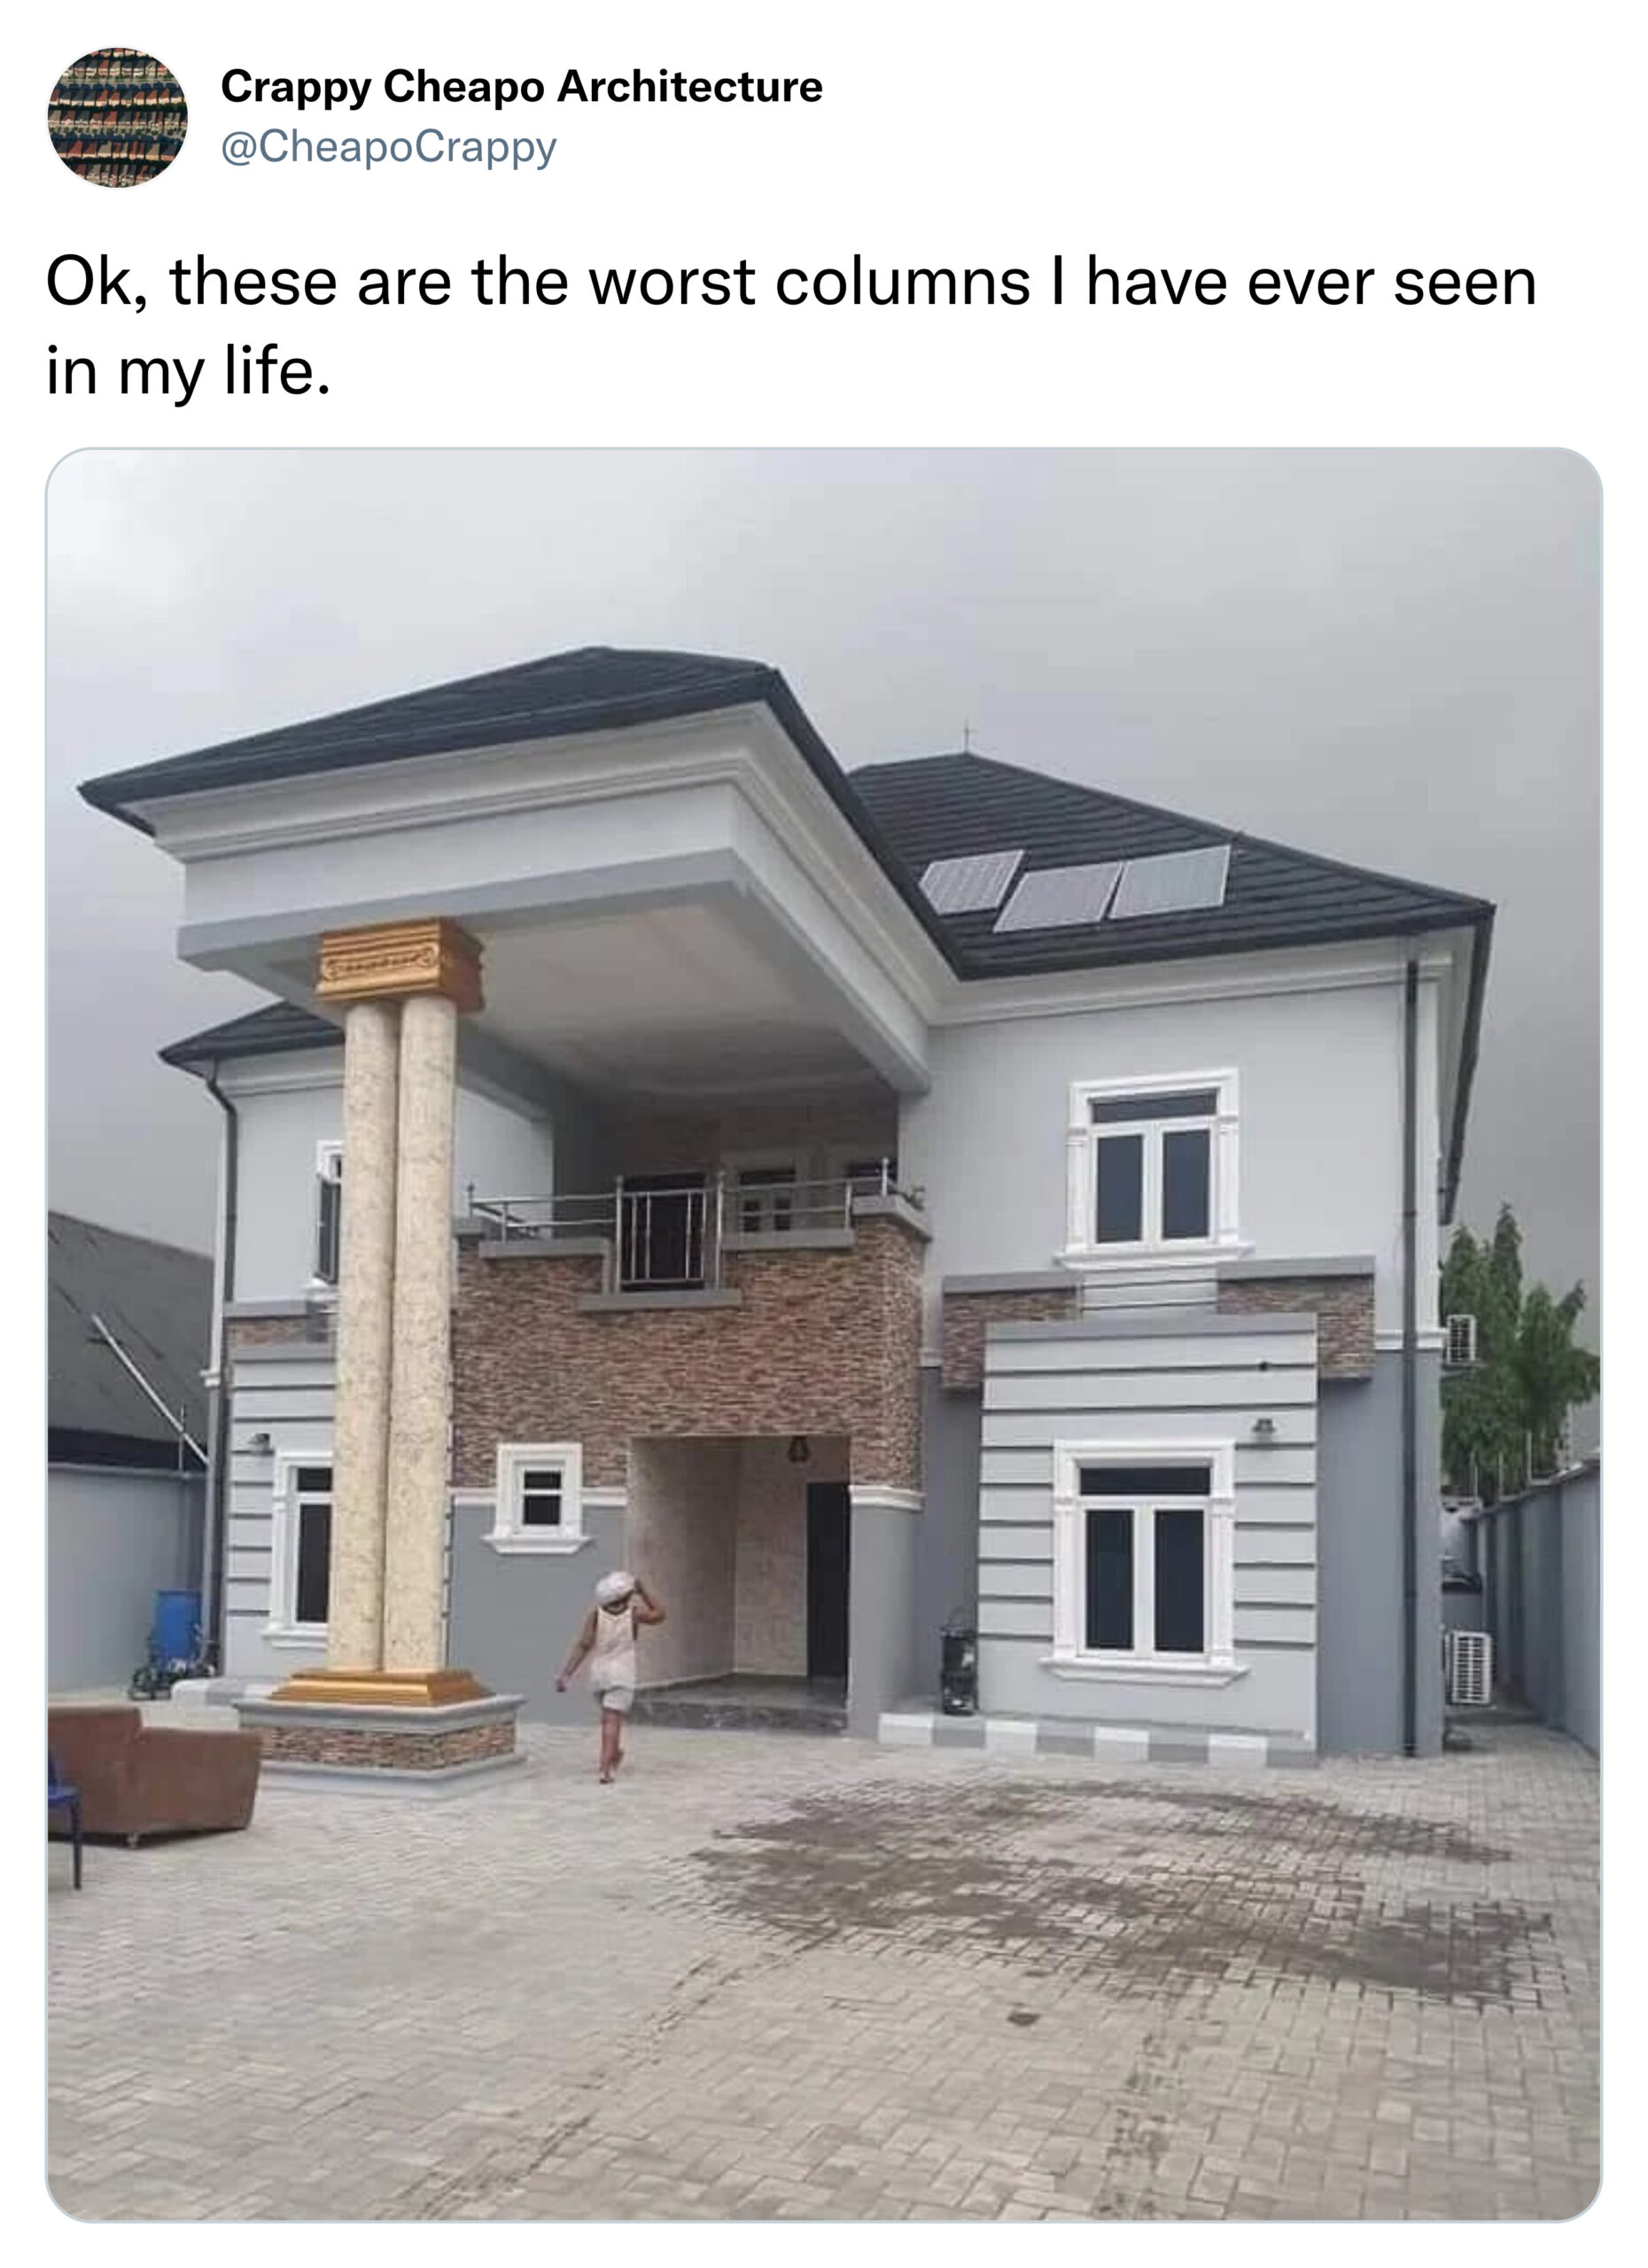 funny tweets - ugly column house - Crappy Cheapo Architecture Ok, these are the worst columns I have ever seen in my life. I